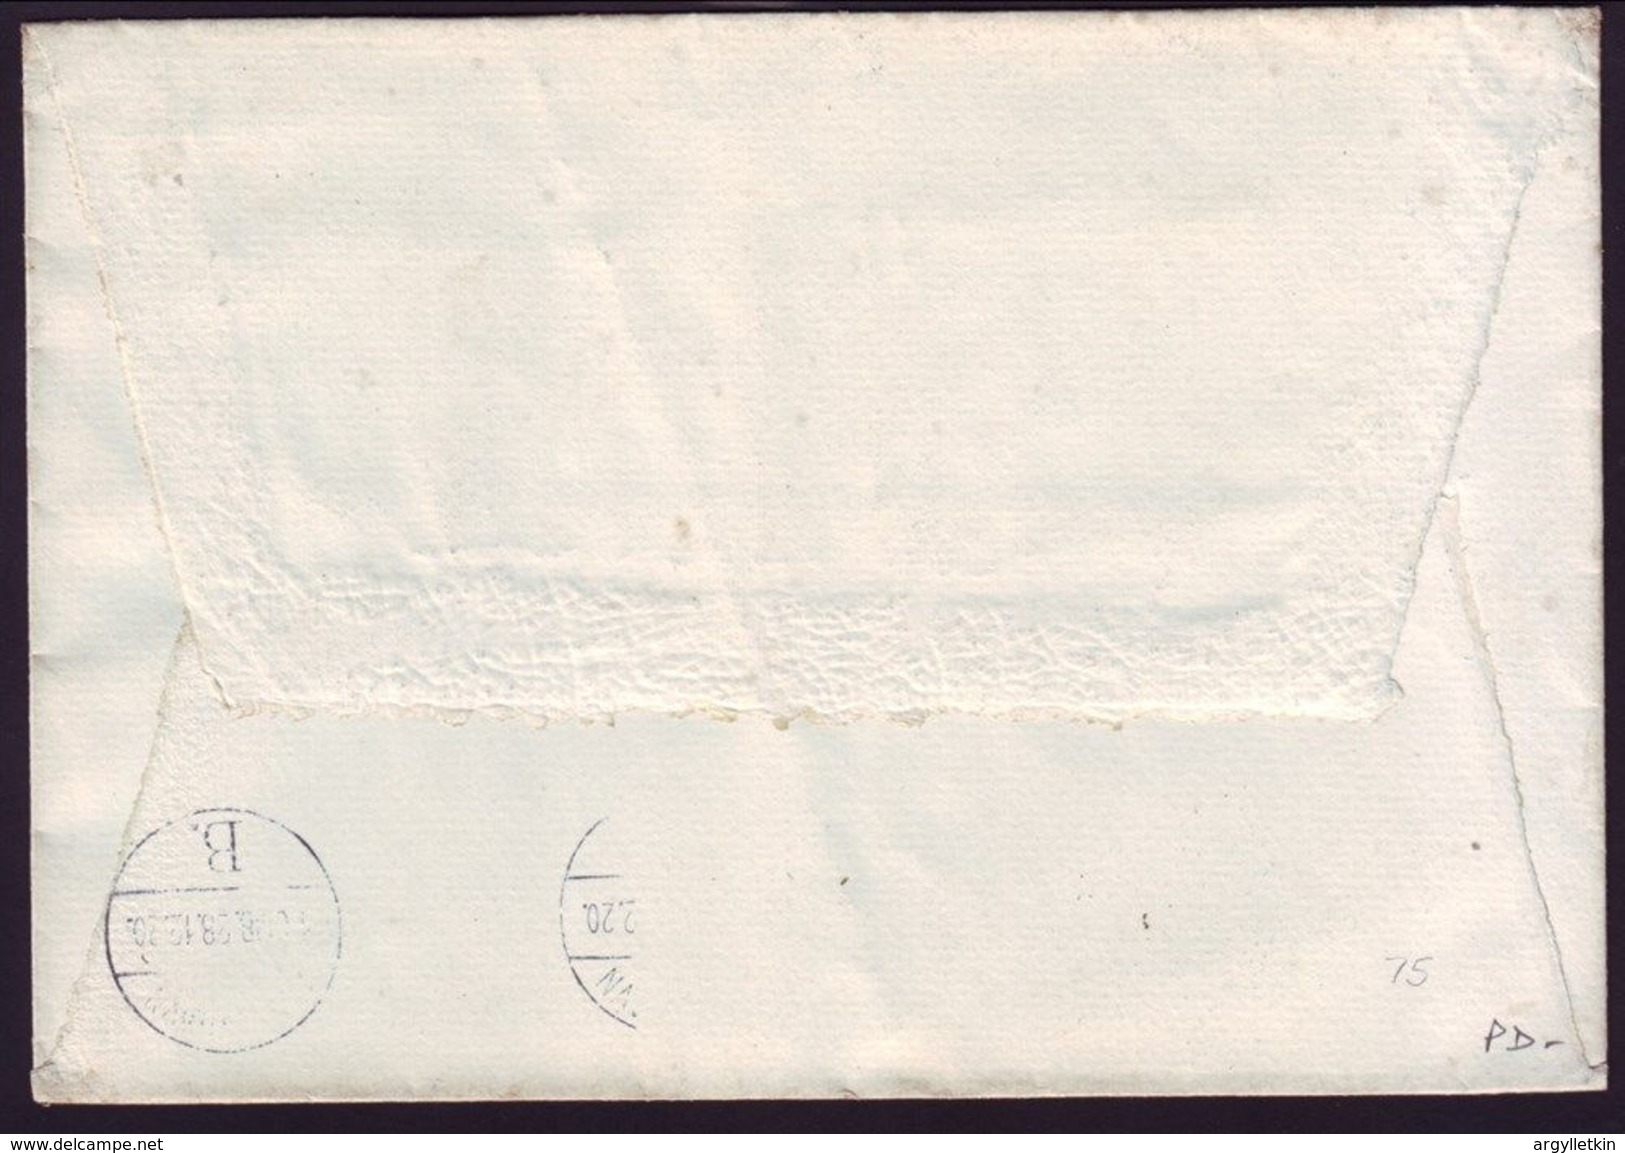 LITHUANIA 1920 'OFFICIAL' STAMPLESS COVER - Lithuania